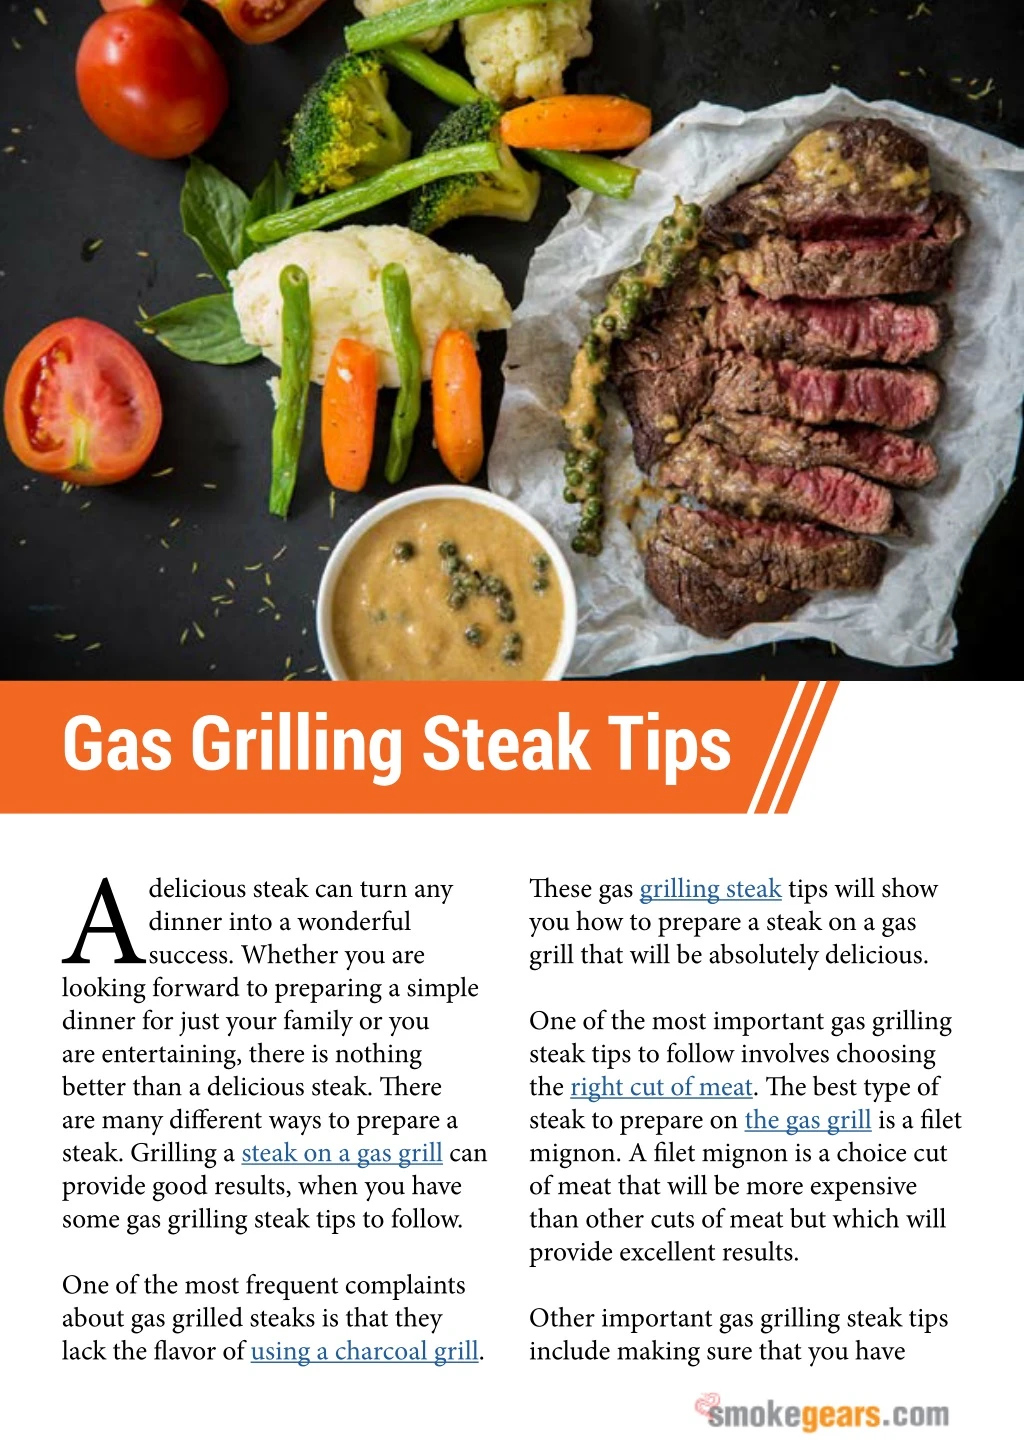 gas grilling steak tips a looking forward